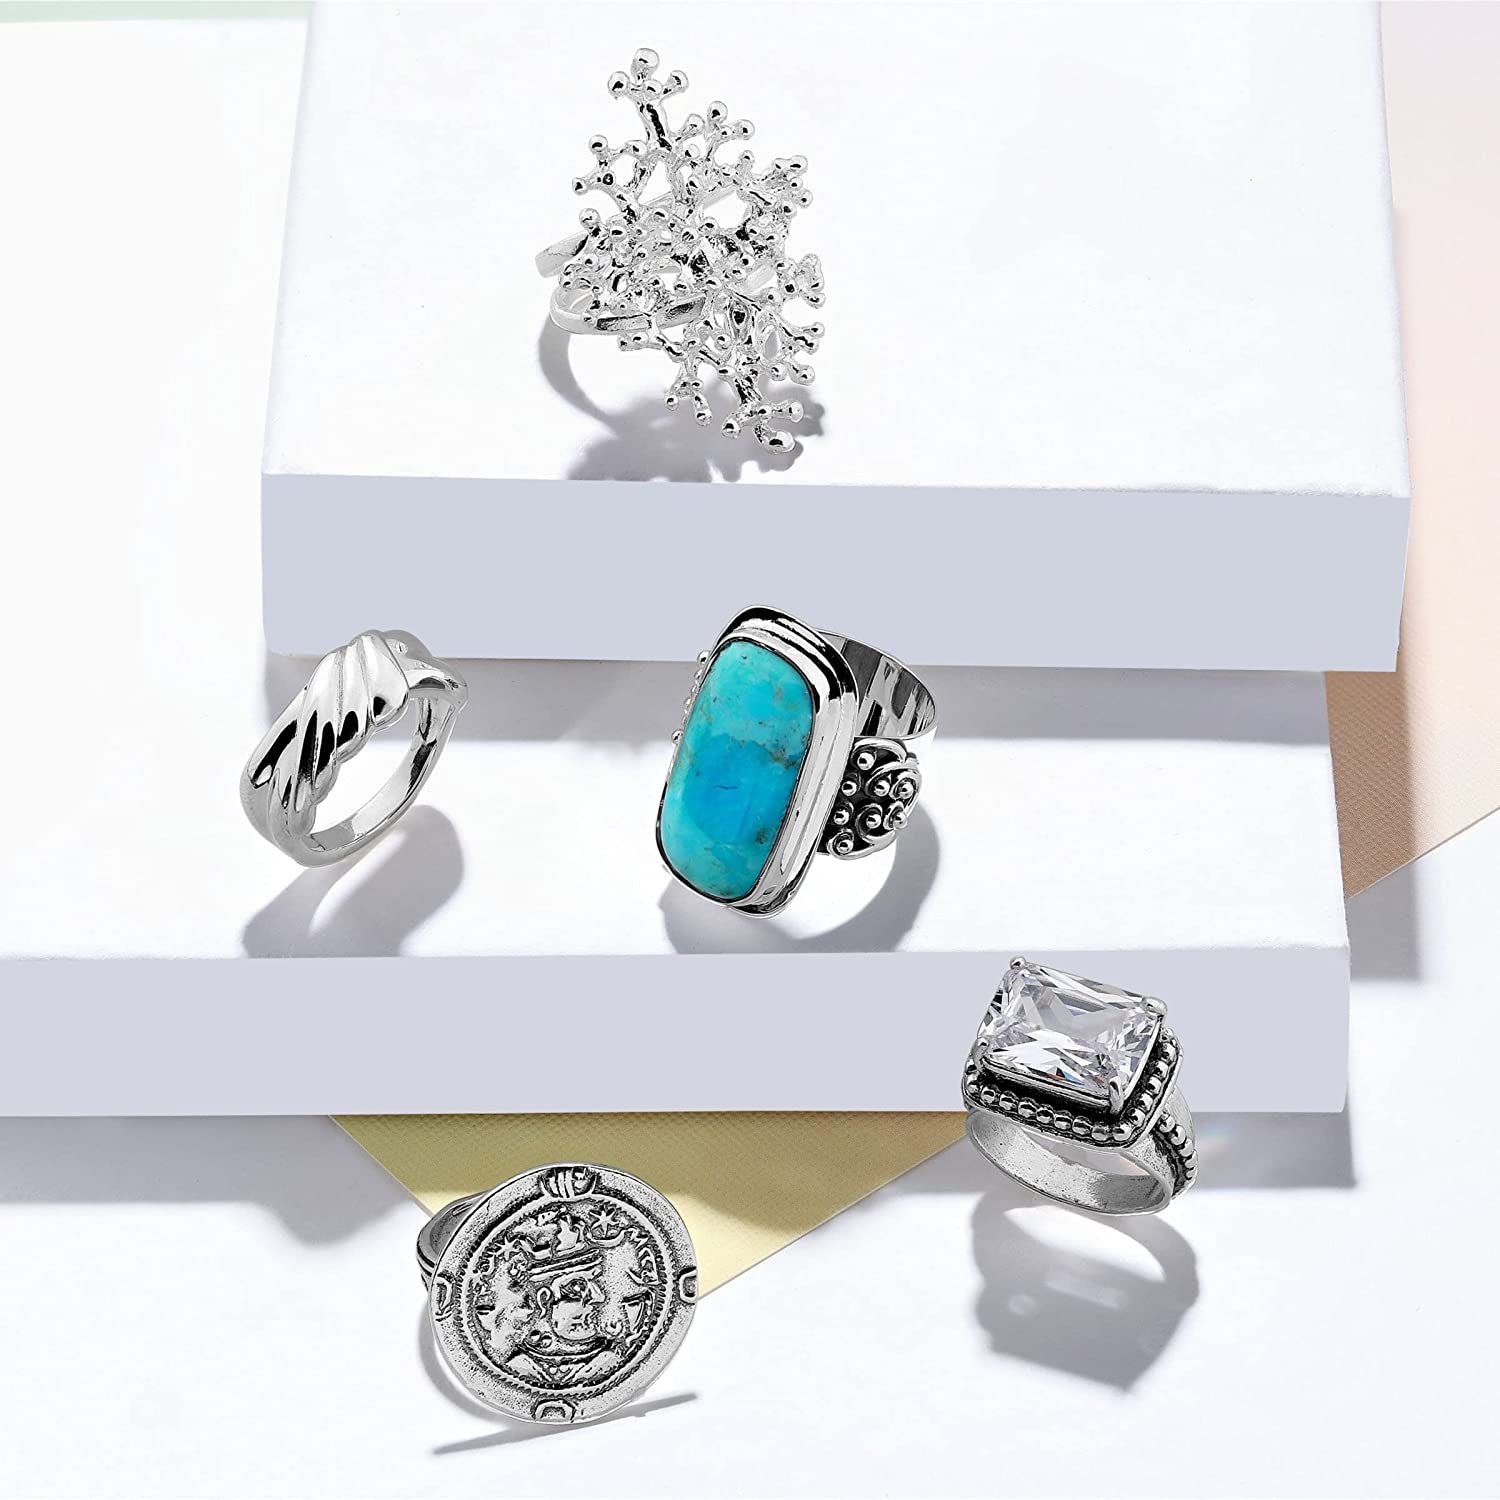 Silpada 'Big Spring' Compressed Mojave Turquoise Statement Ring in Sterling Silver